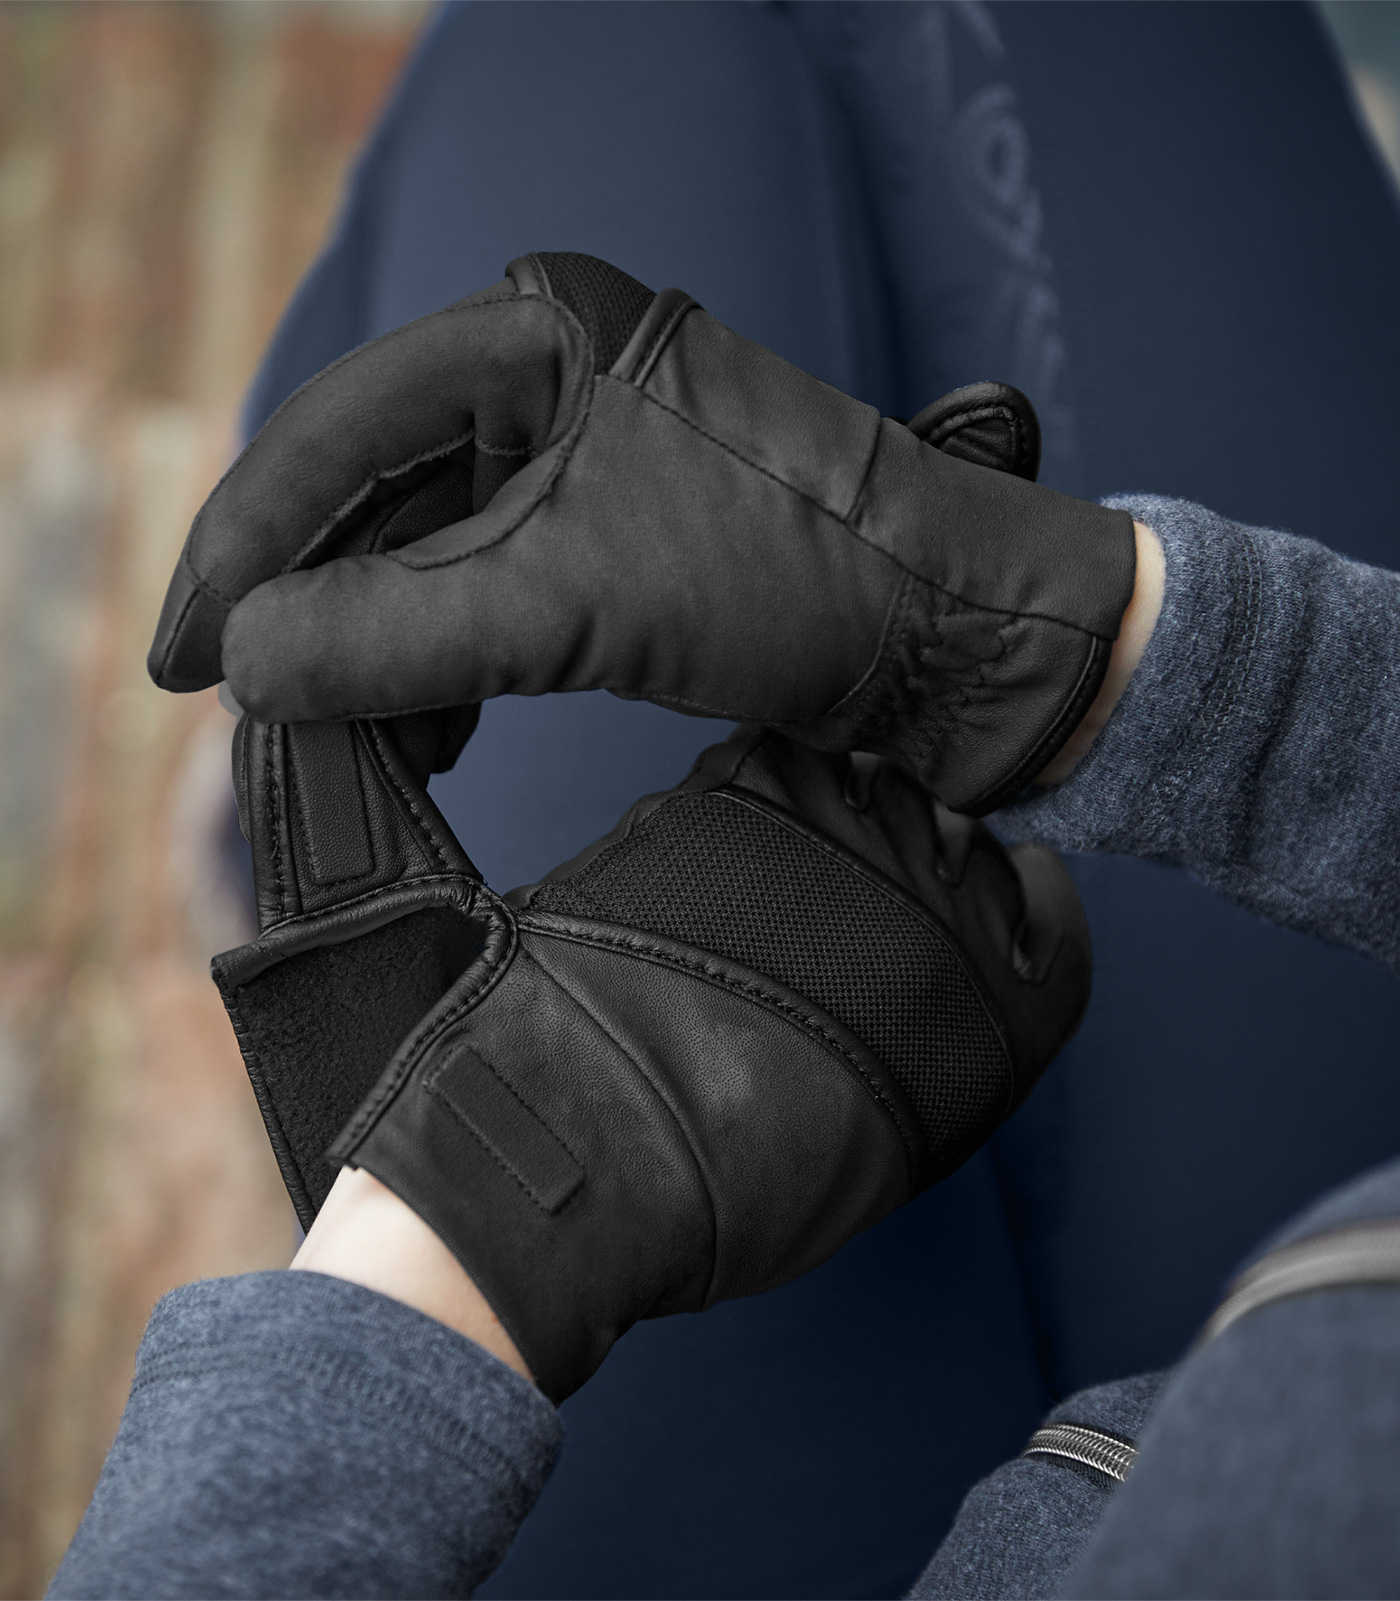 Magnetize Winter Riding Glove